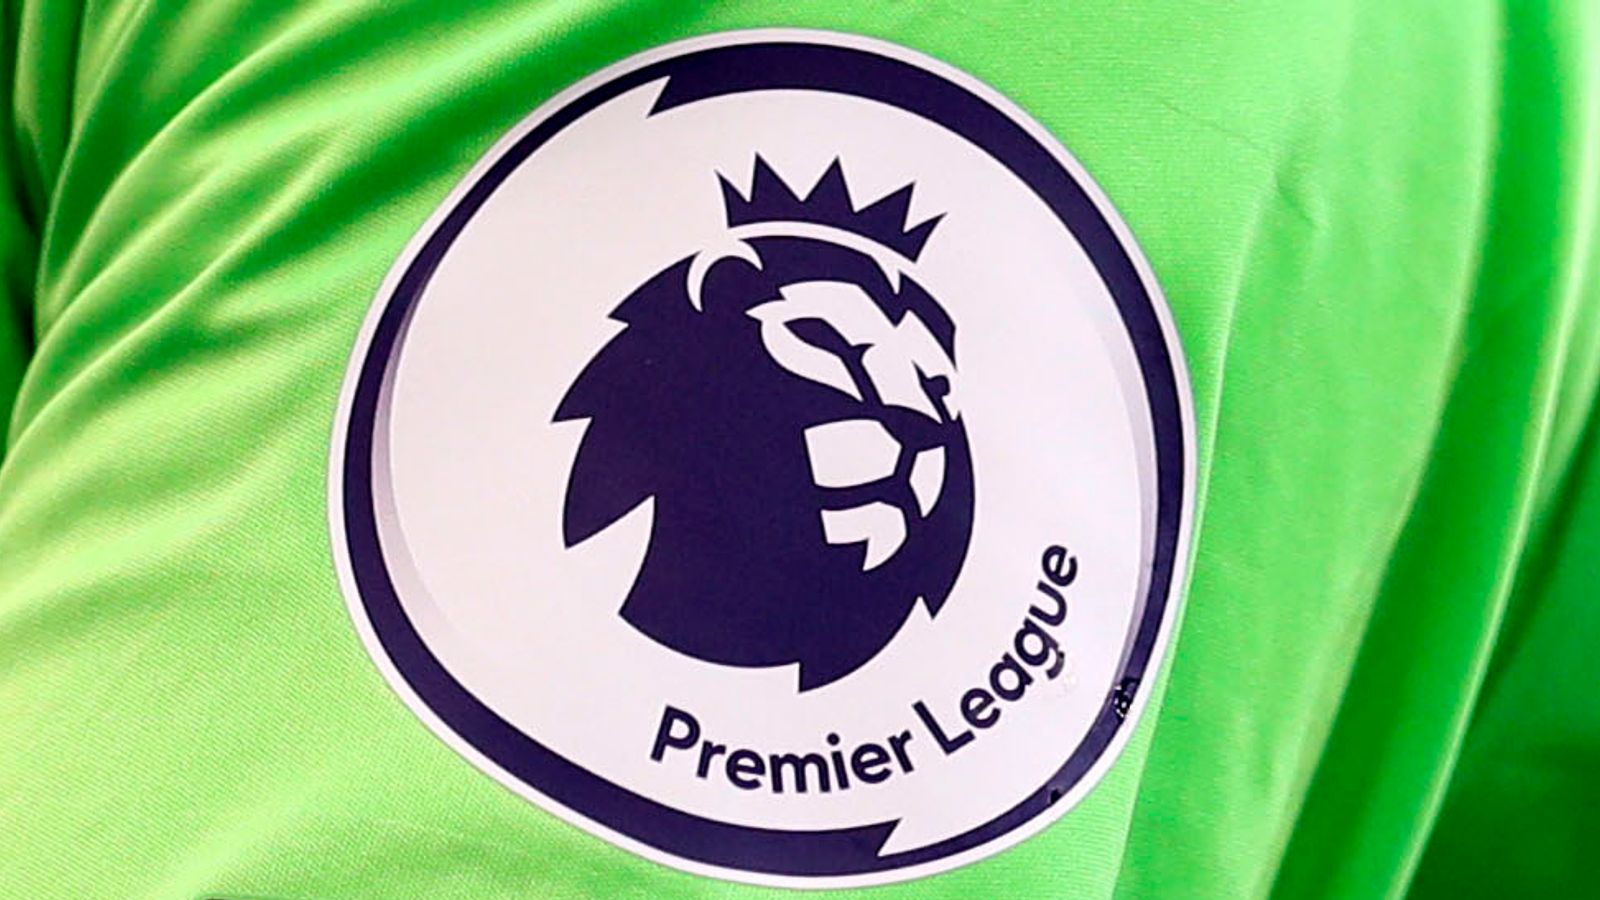 EPL: Semi-Automated Offside Technology To Be Used Next Season